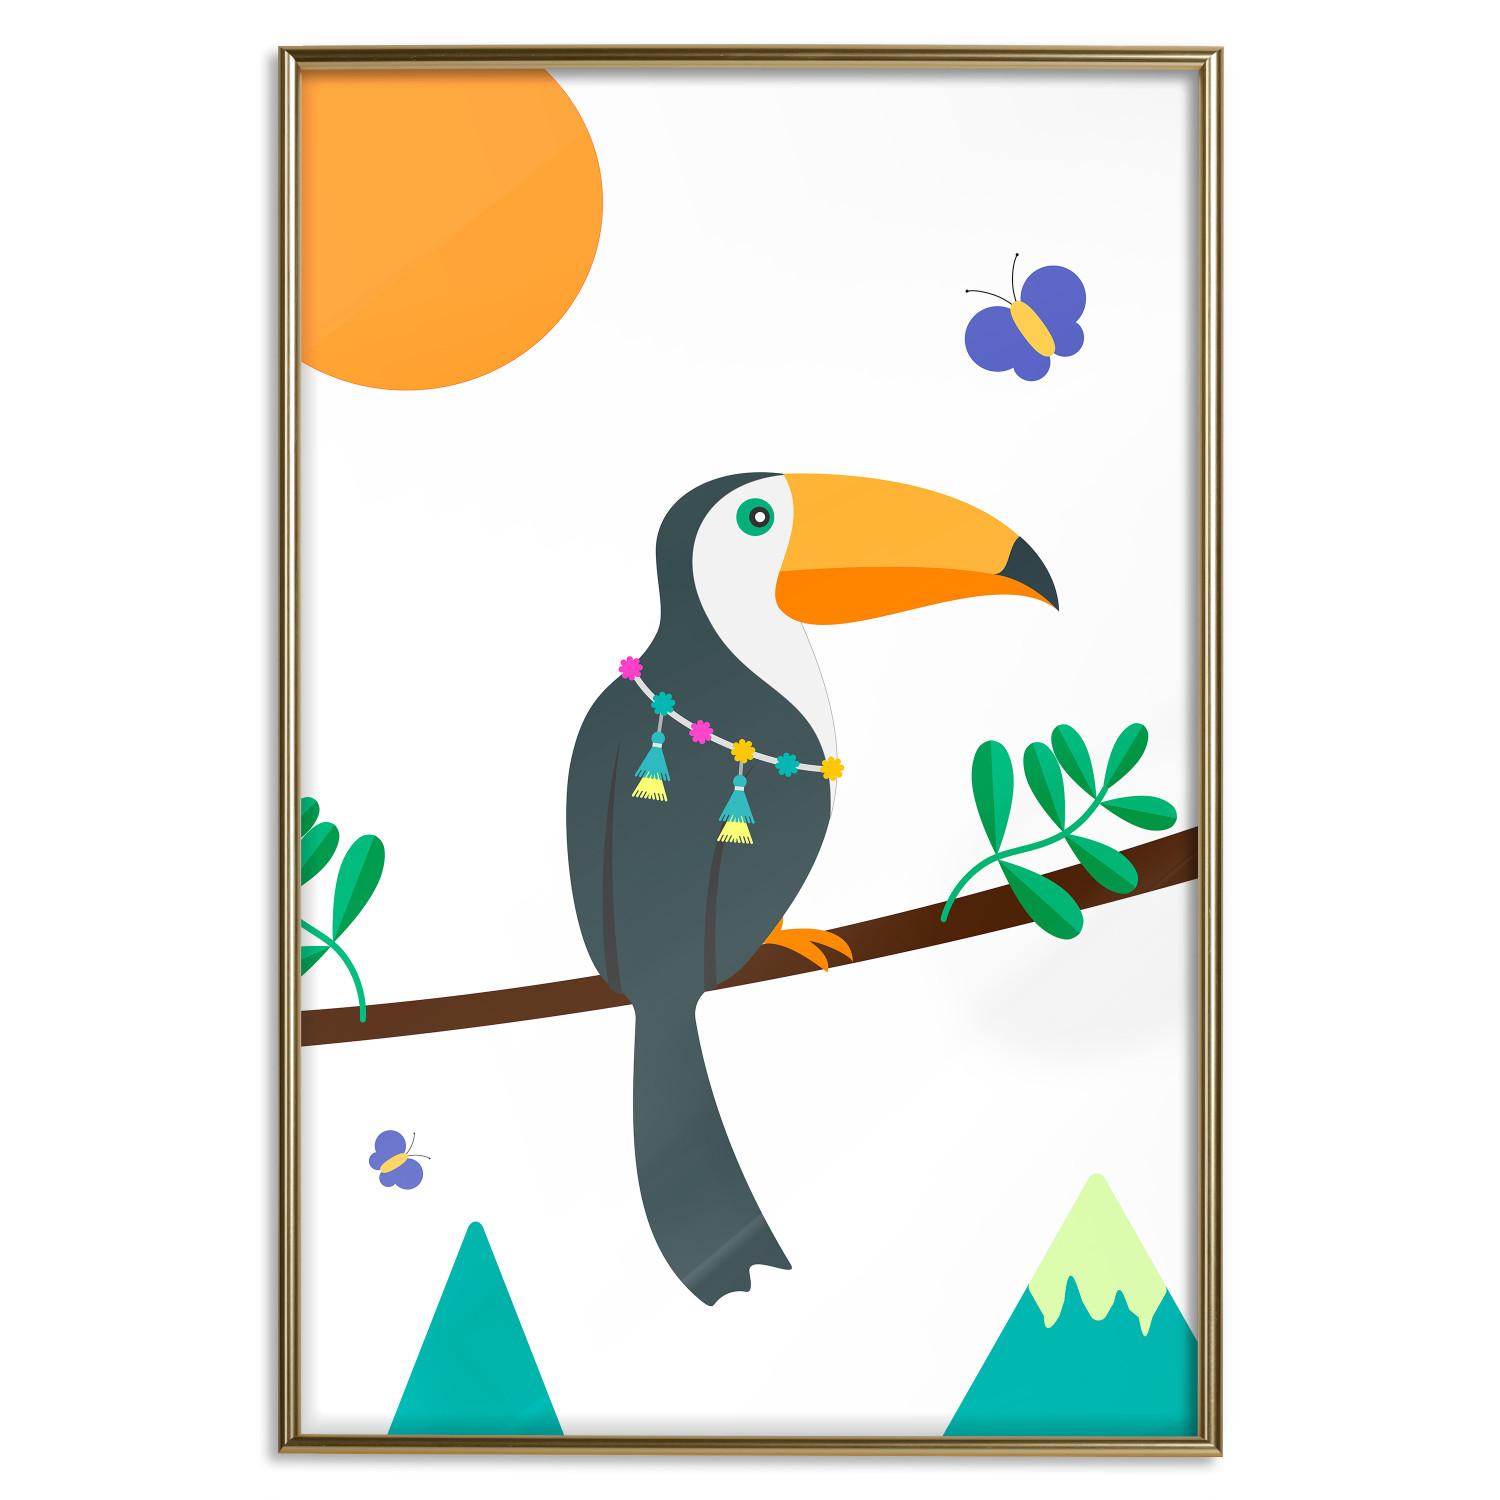 Gallery wall Toucan and Butterflies - amusing parrot with colorful necklace on white background